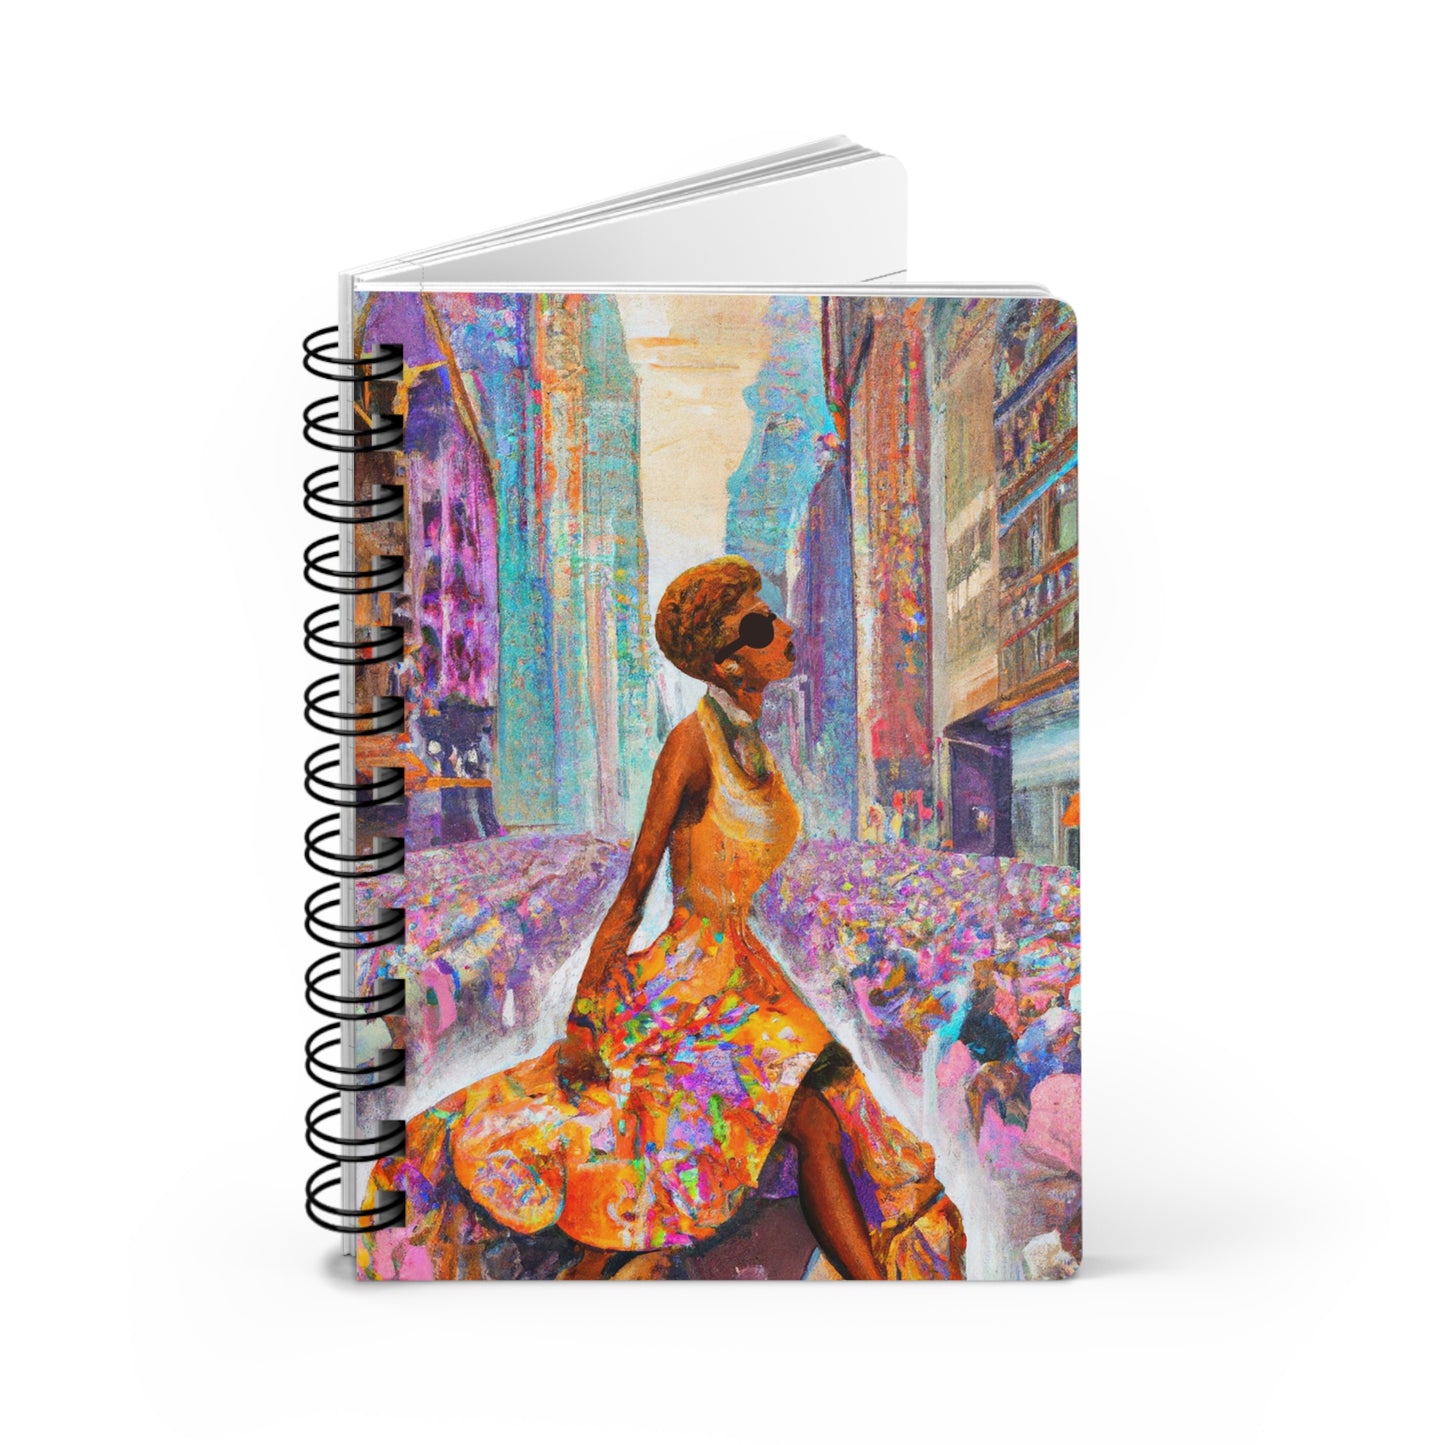 Flossy and Classy Spiral Bound Notebooks and Journals with 2023-2024 Year-at-a-Glance Calendar